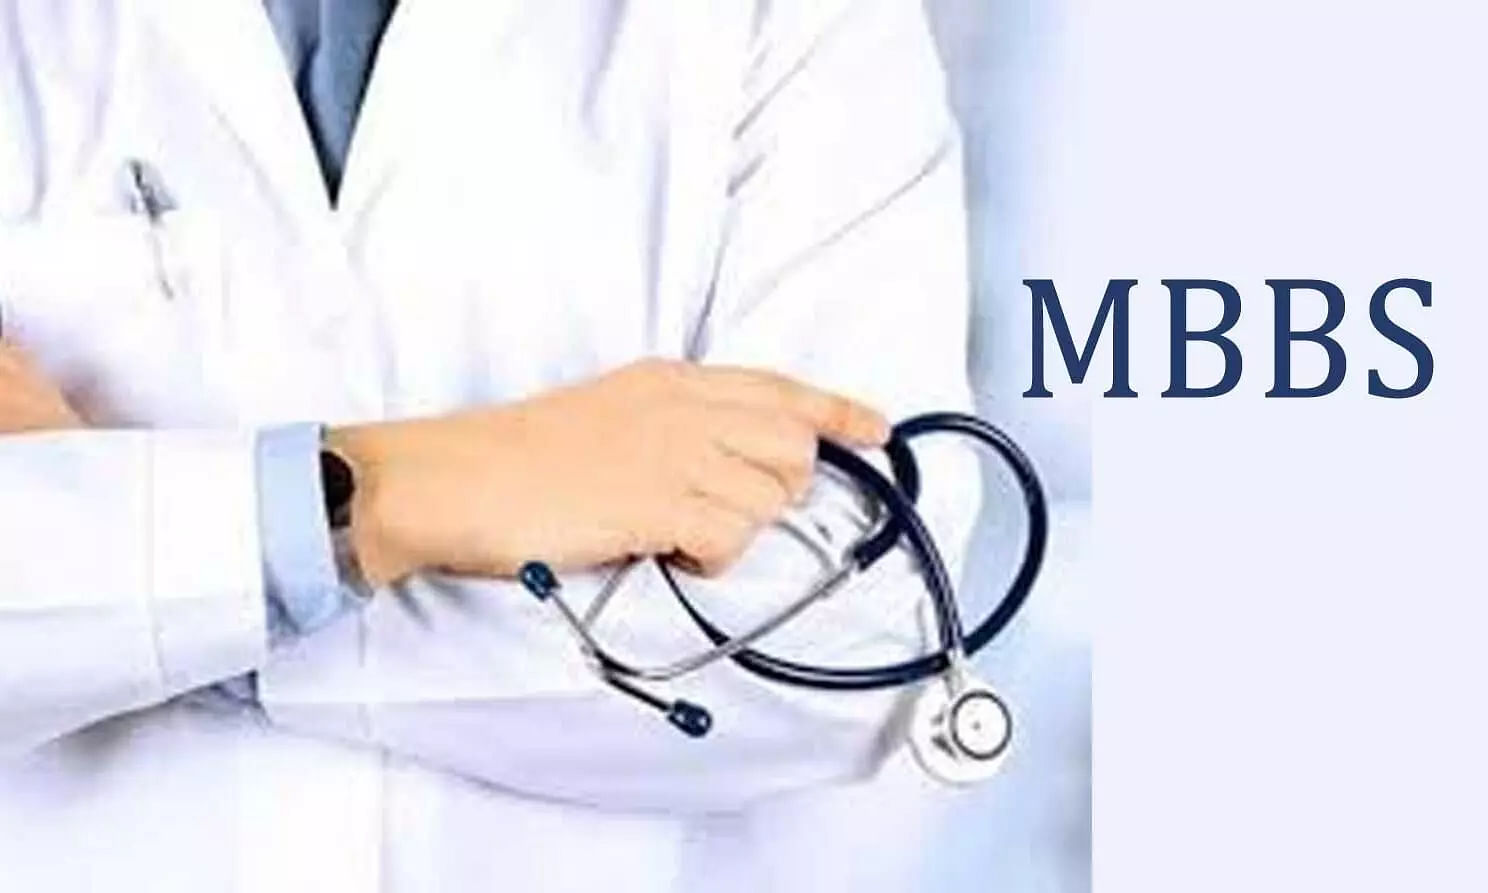 50 MBBS Seats Reserved at SMIMS for Sikkimese Students